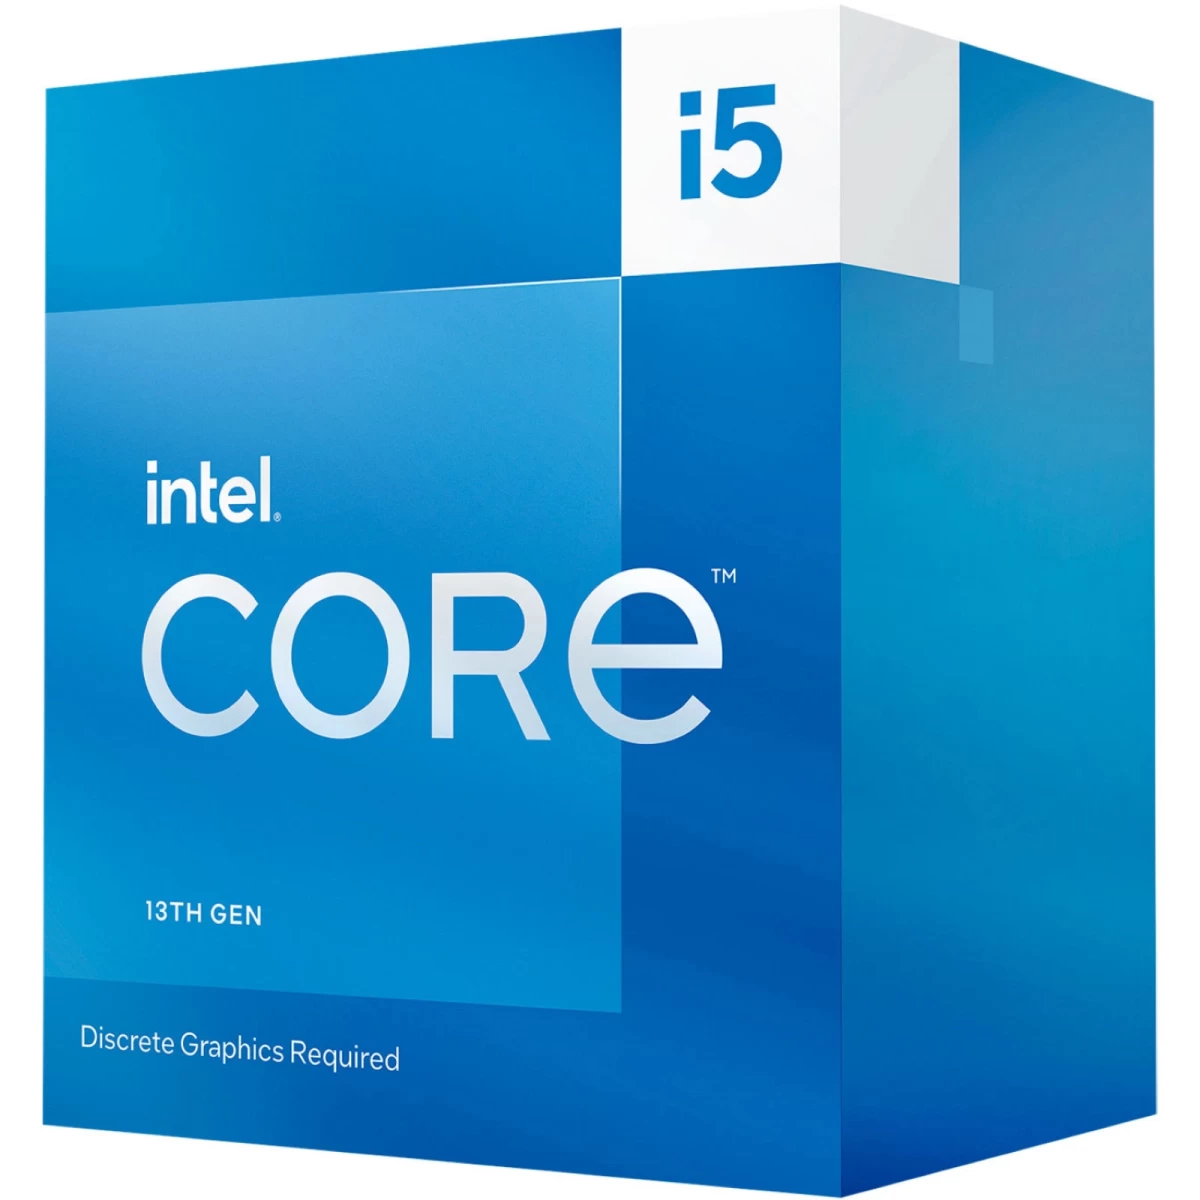 Intel - 13Gen Core i5-13400F 10-Cores up to 4.6GHz - BX8071513400F